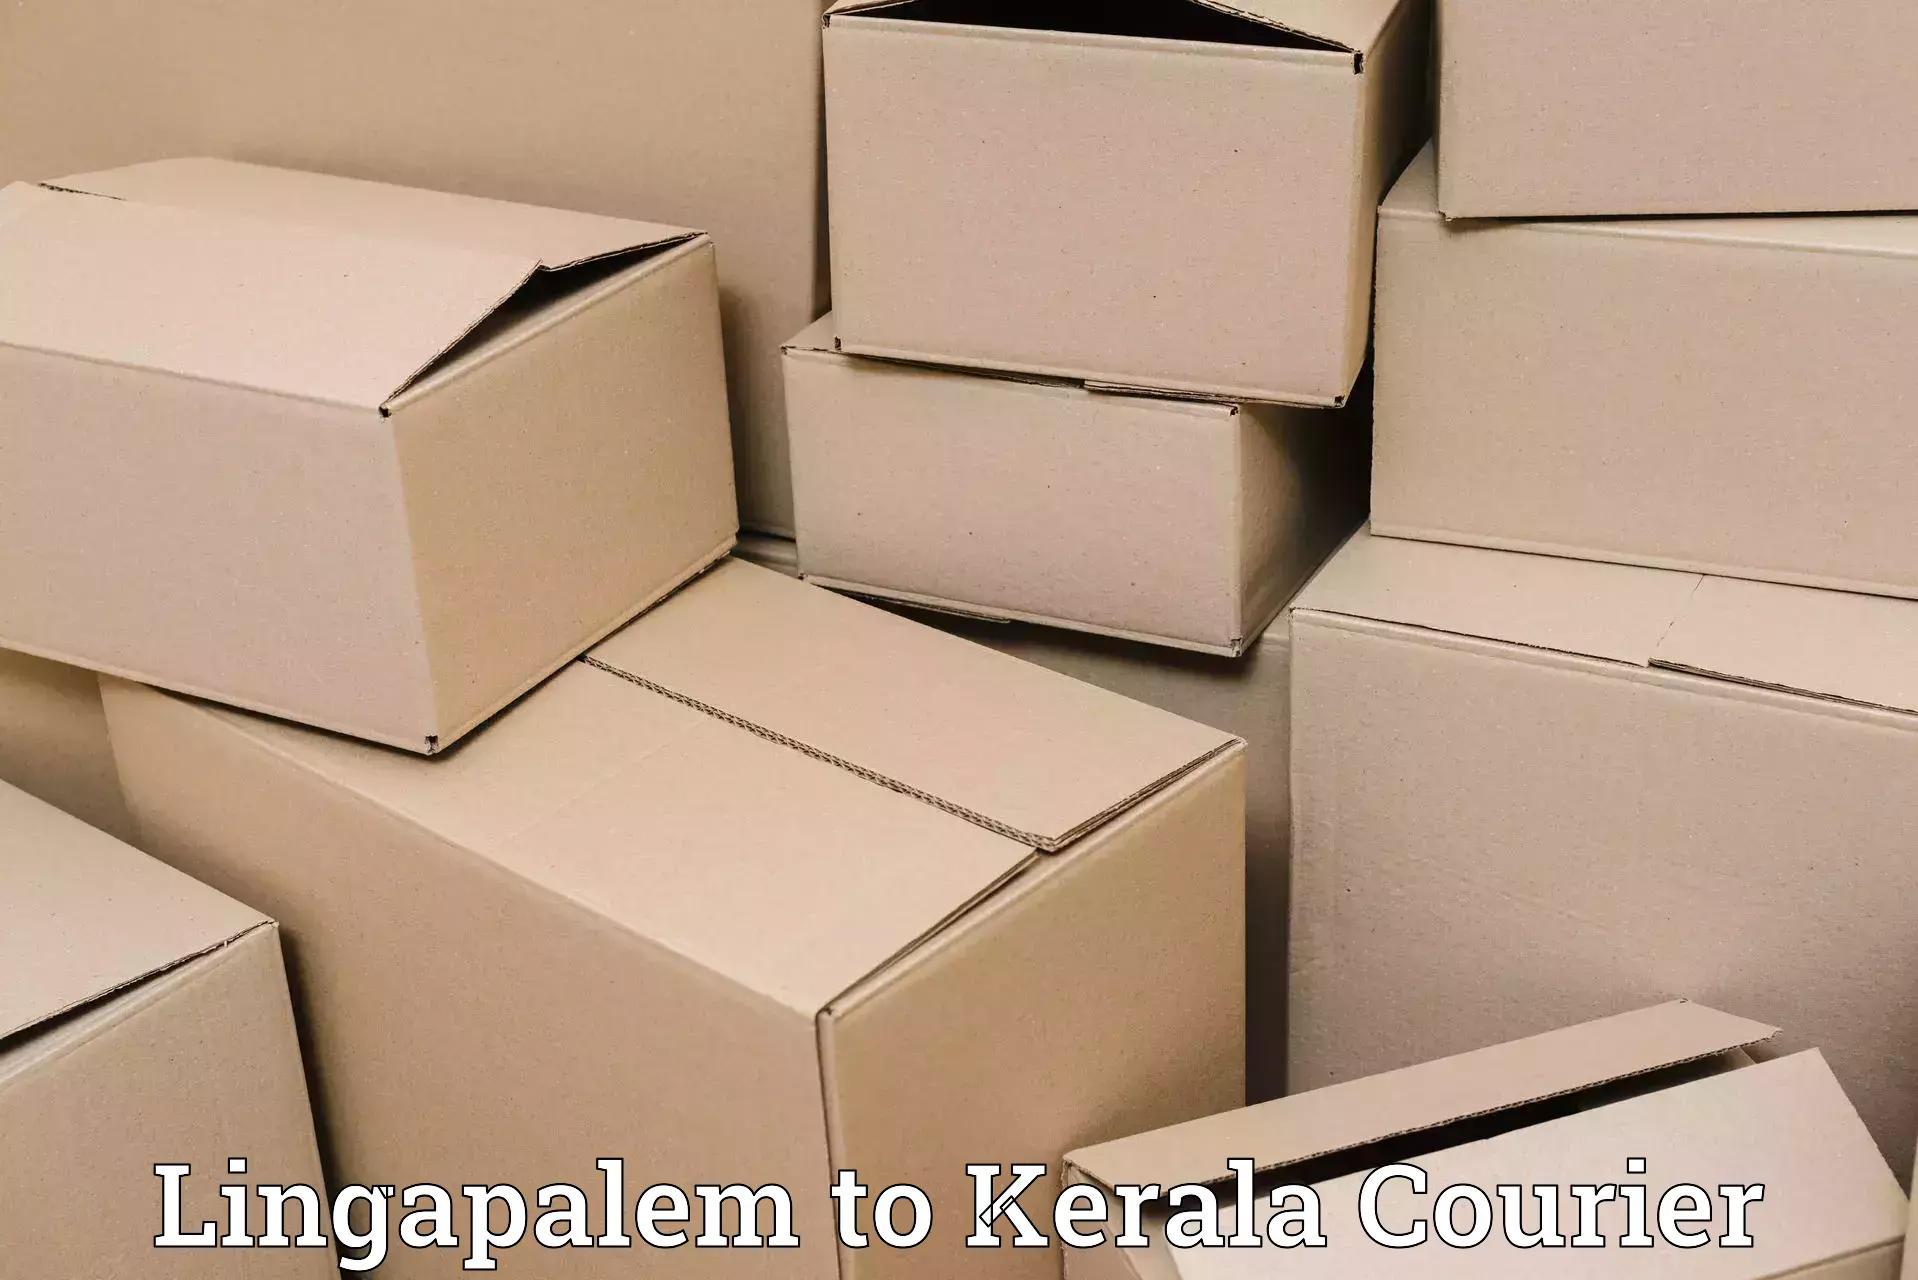 Fast shipping solutions Lingapalem to Alappuzha